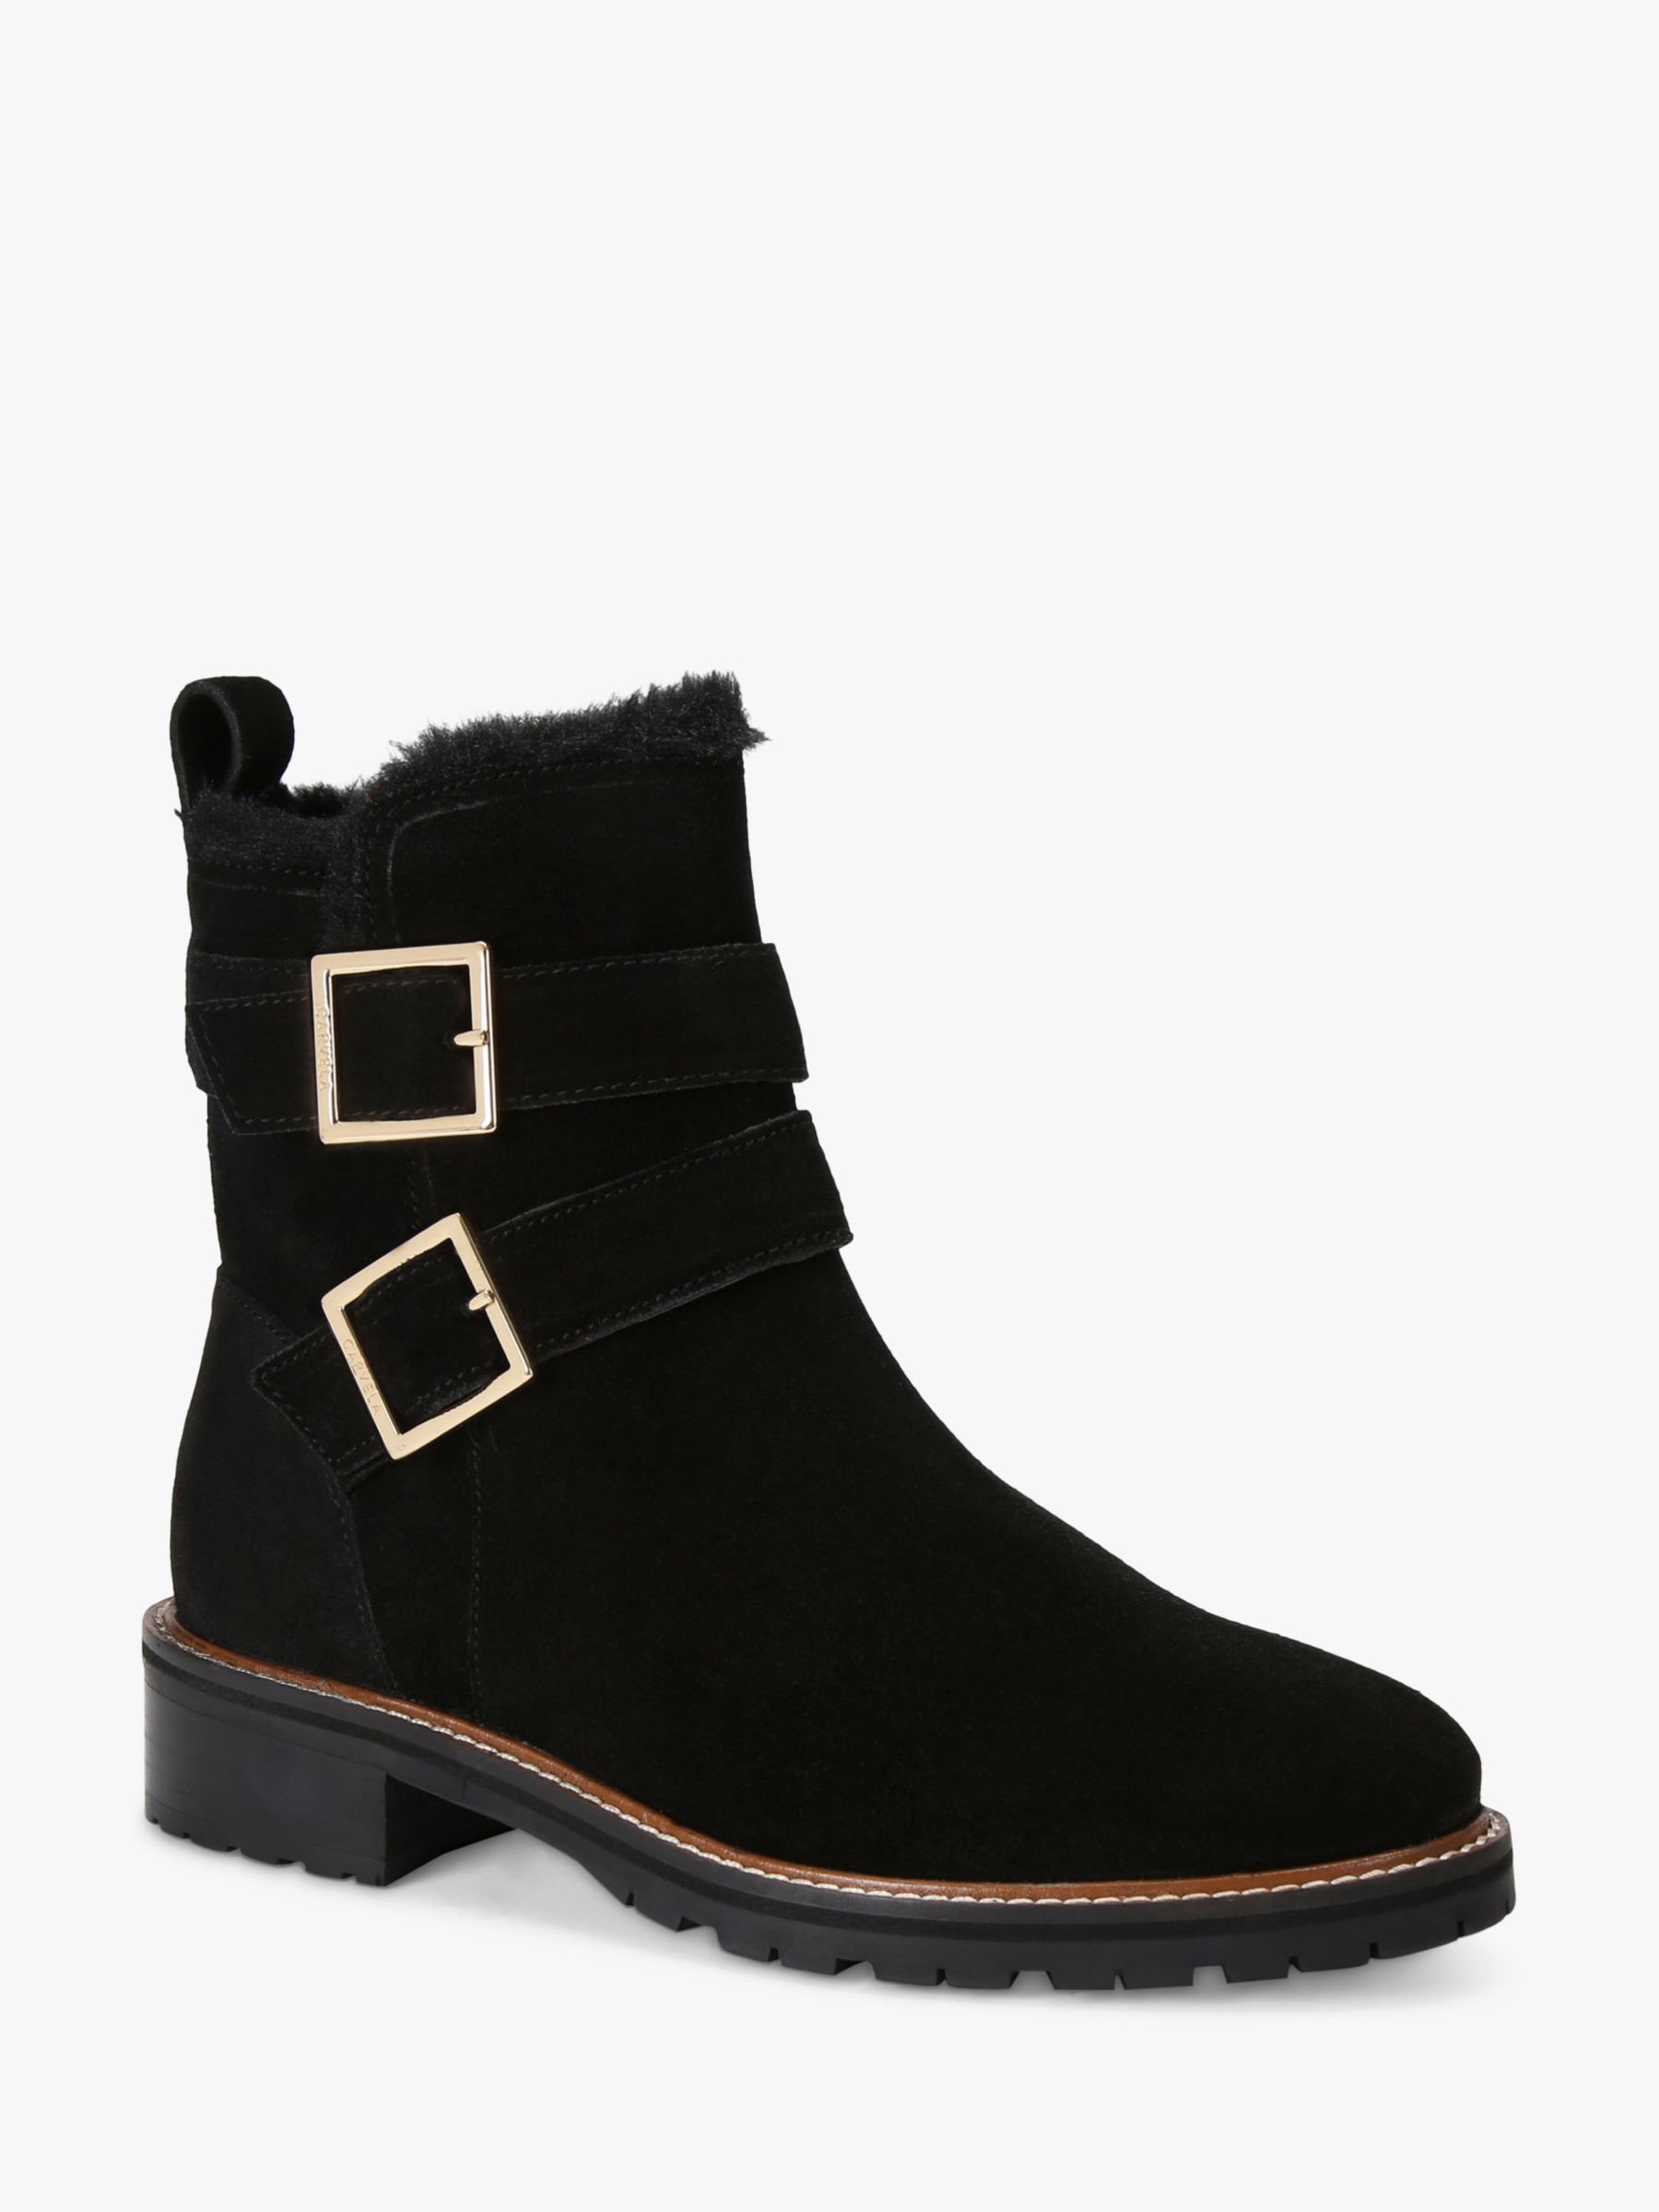 Carvela Cosy Suede Ankle Boots, Black at John Lewis & Partners